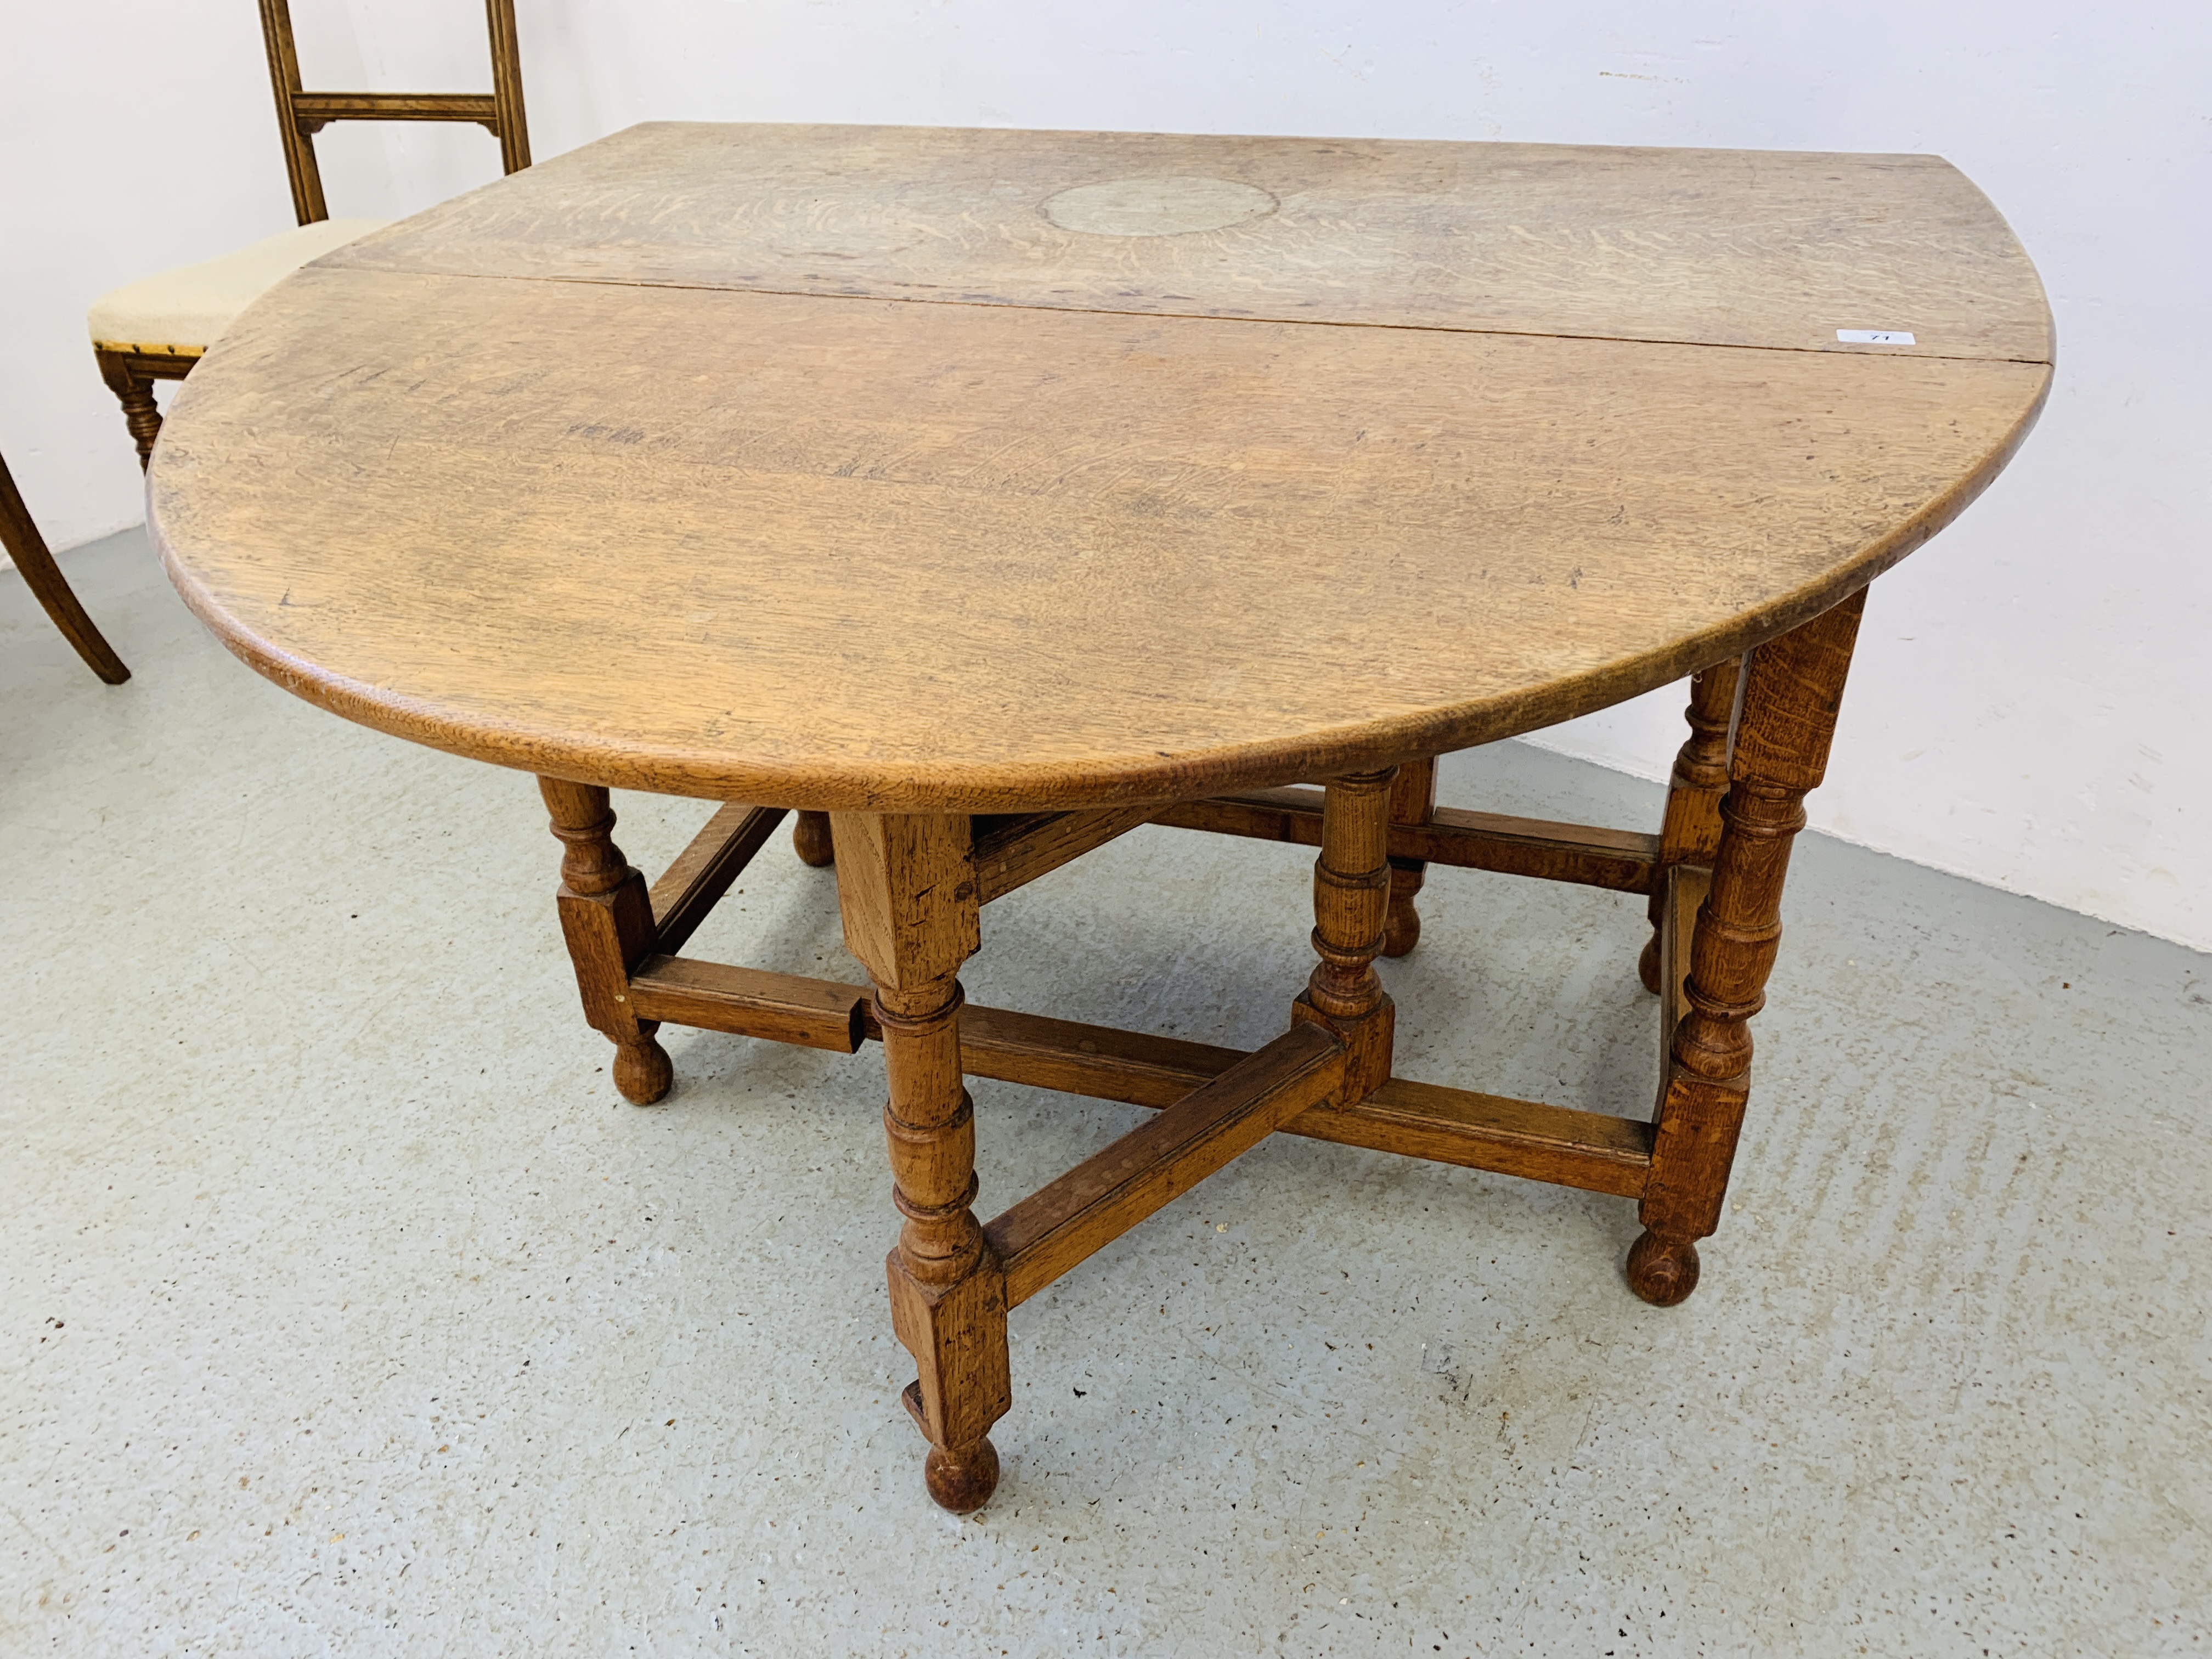 A SET OF 6 OAK FRAMED EDWARDIAN DINING CHAIRS ALONG WITH A SOLID OAK GATELEG DINING TABLE - Image 20 of 20